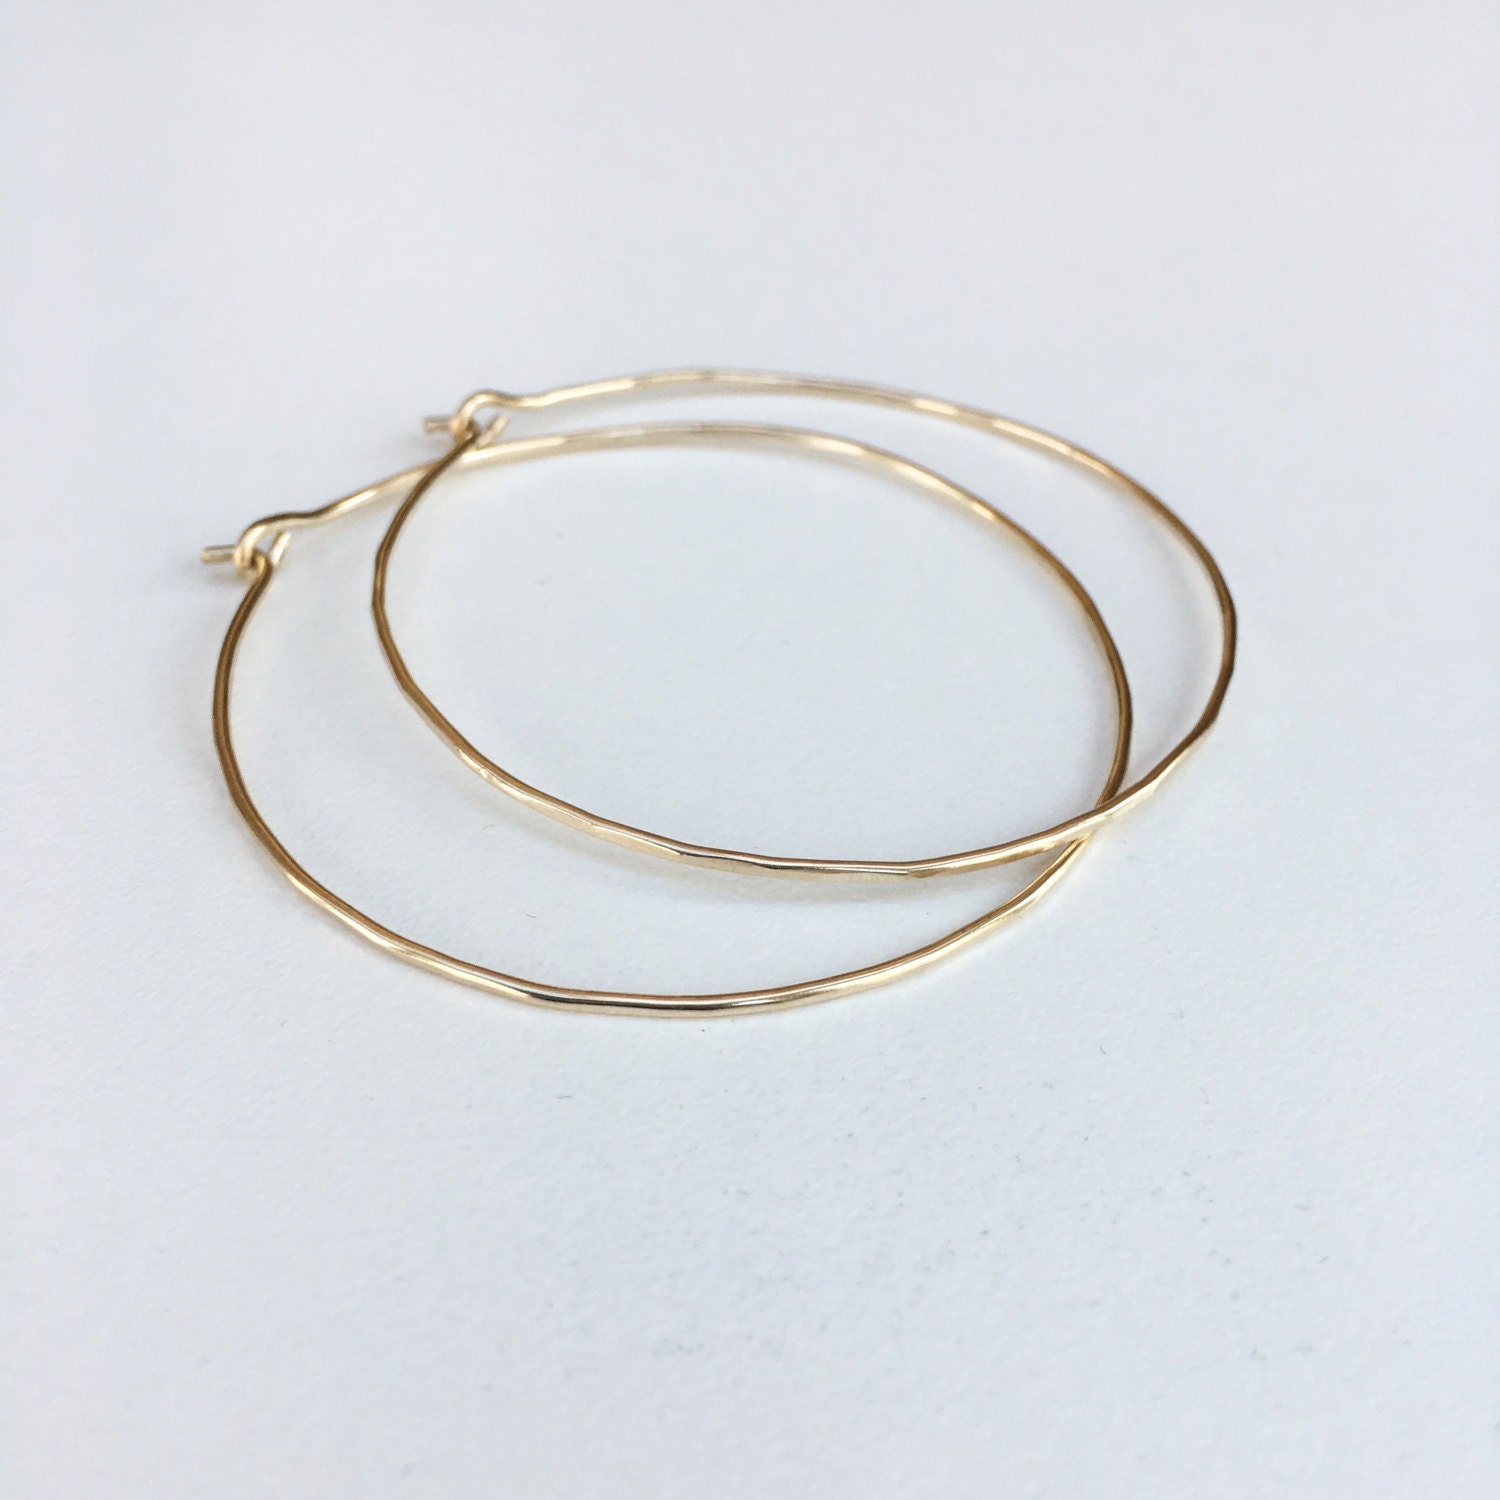 2 inch solid gold hoops 10K solid gold skinny hammered